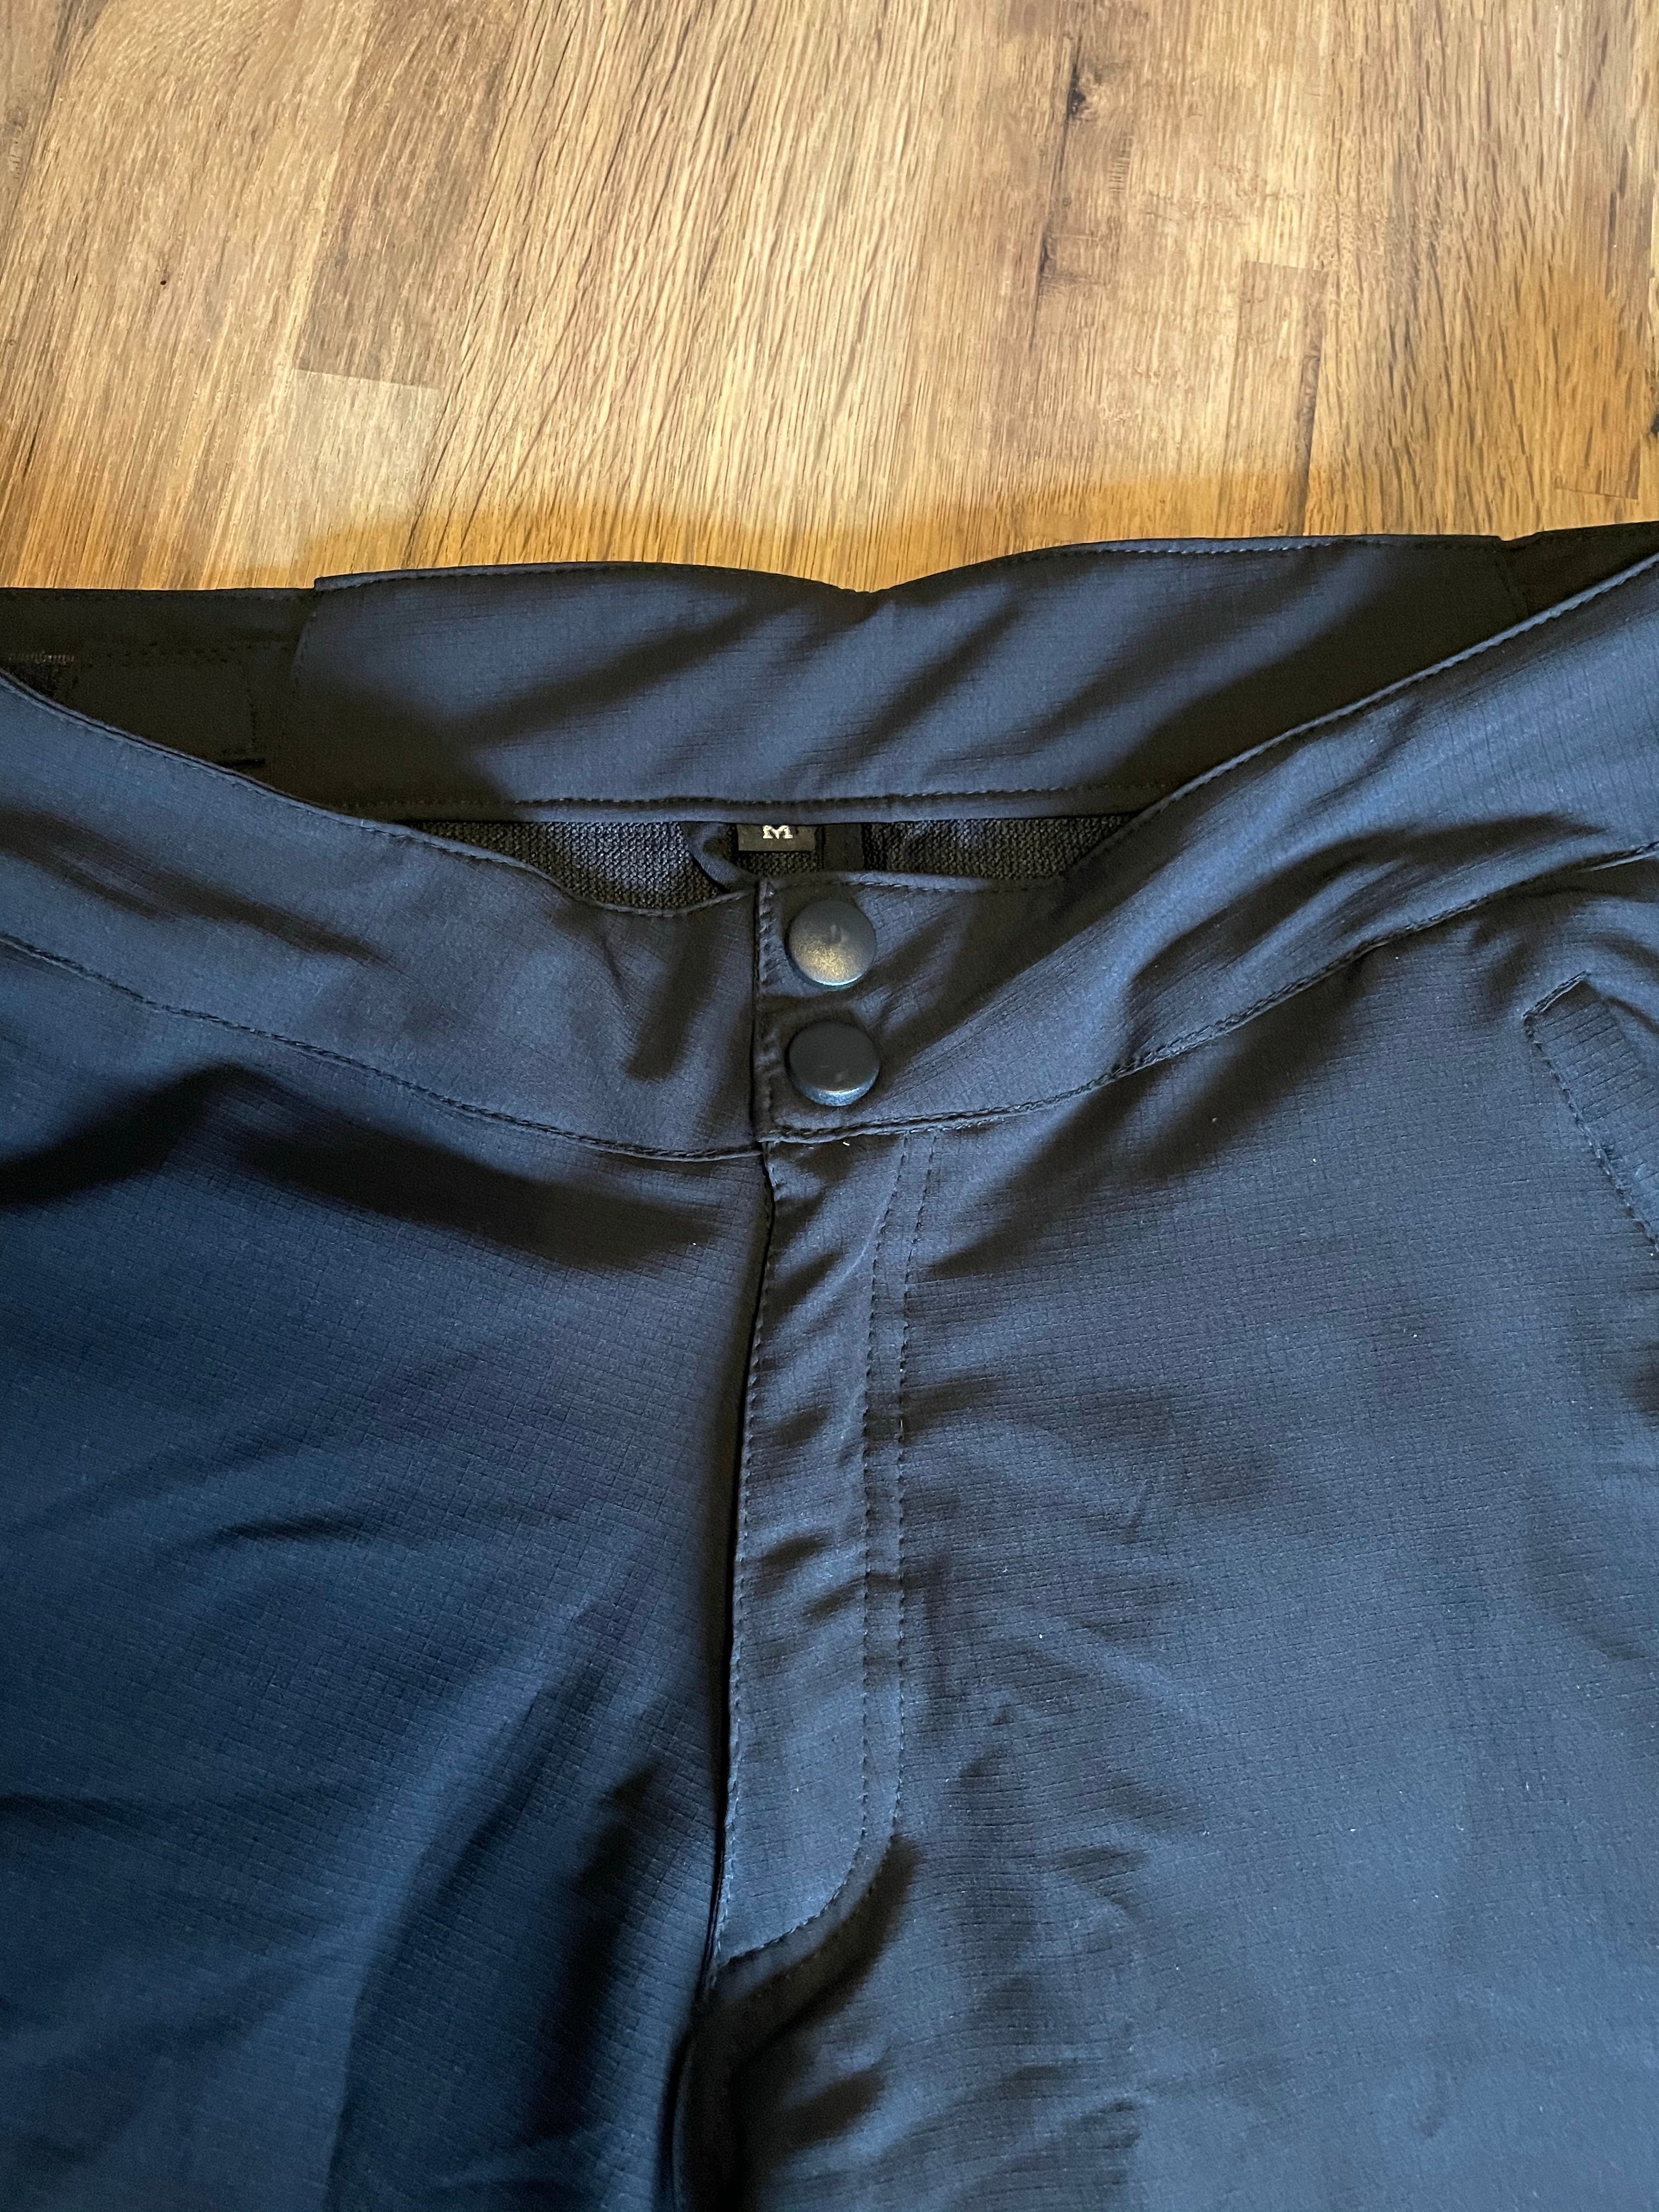 Pinned Attire - Black and Gold trail shorts